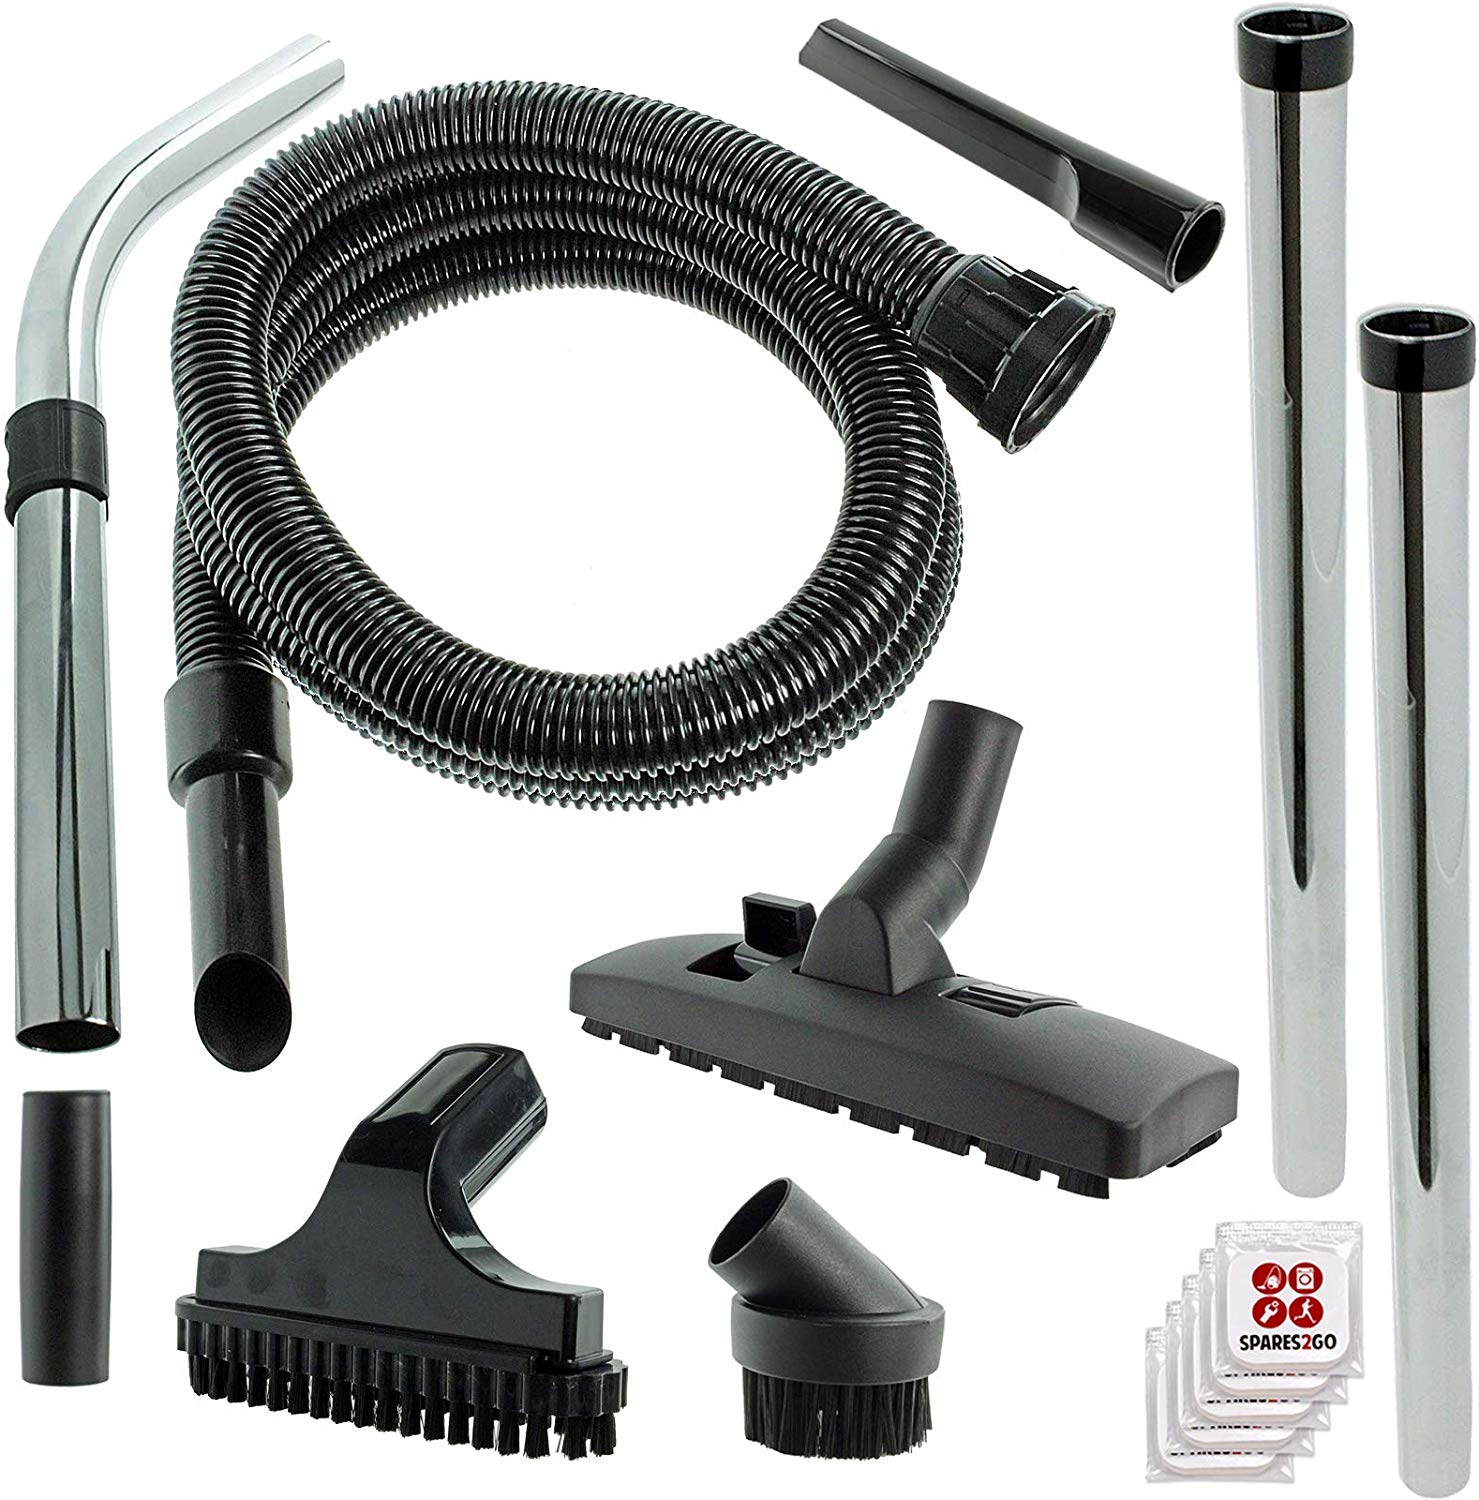 SPARES2GO Hose & Tool Kit For Numatic Henry Hetty James Vacuum Cleaner Hoover (2.5m) + Fresheners